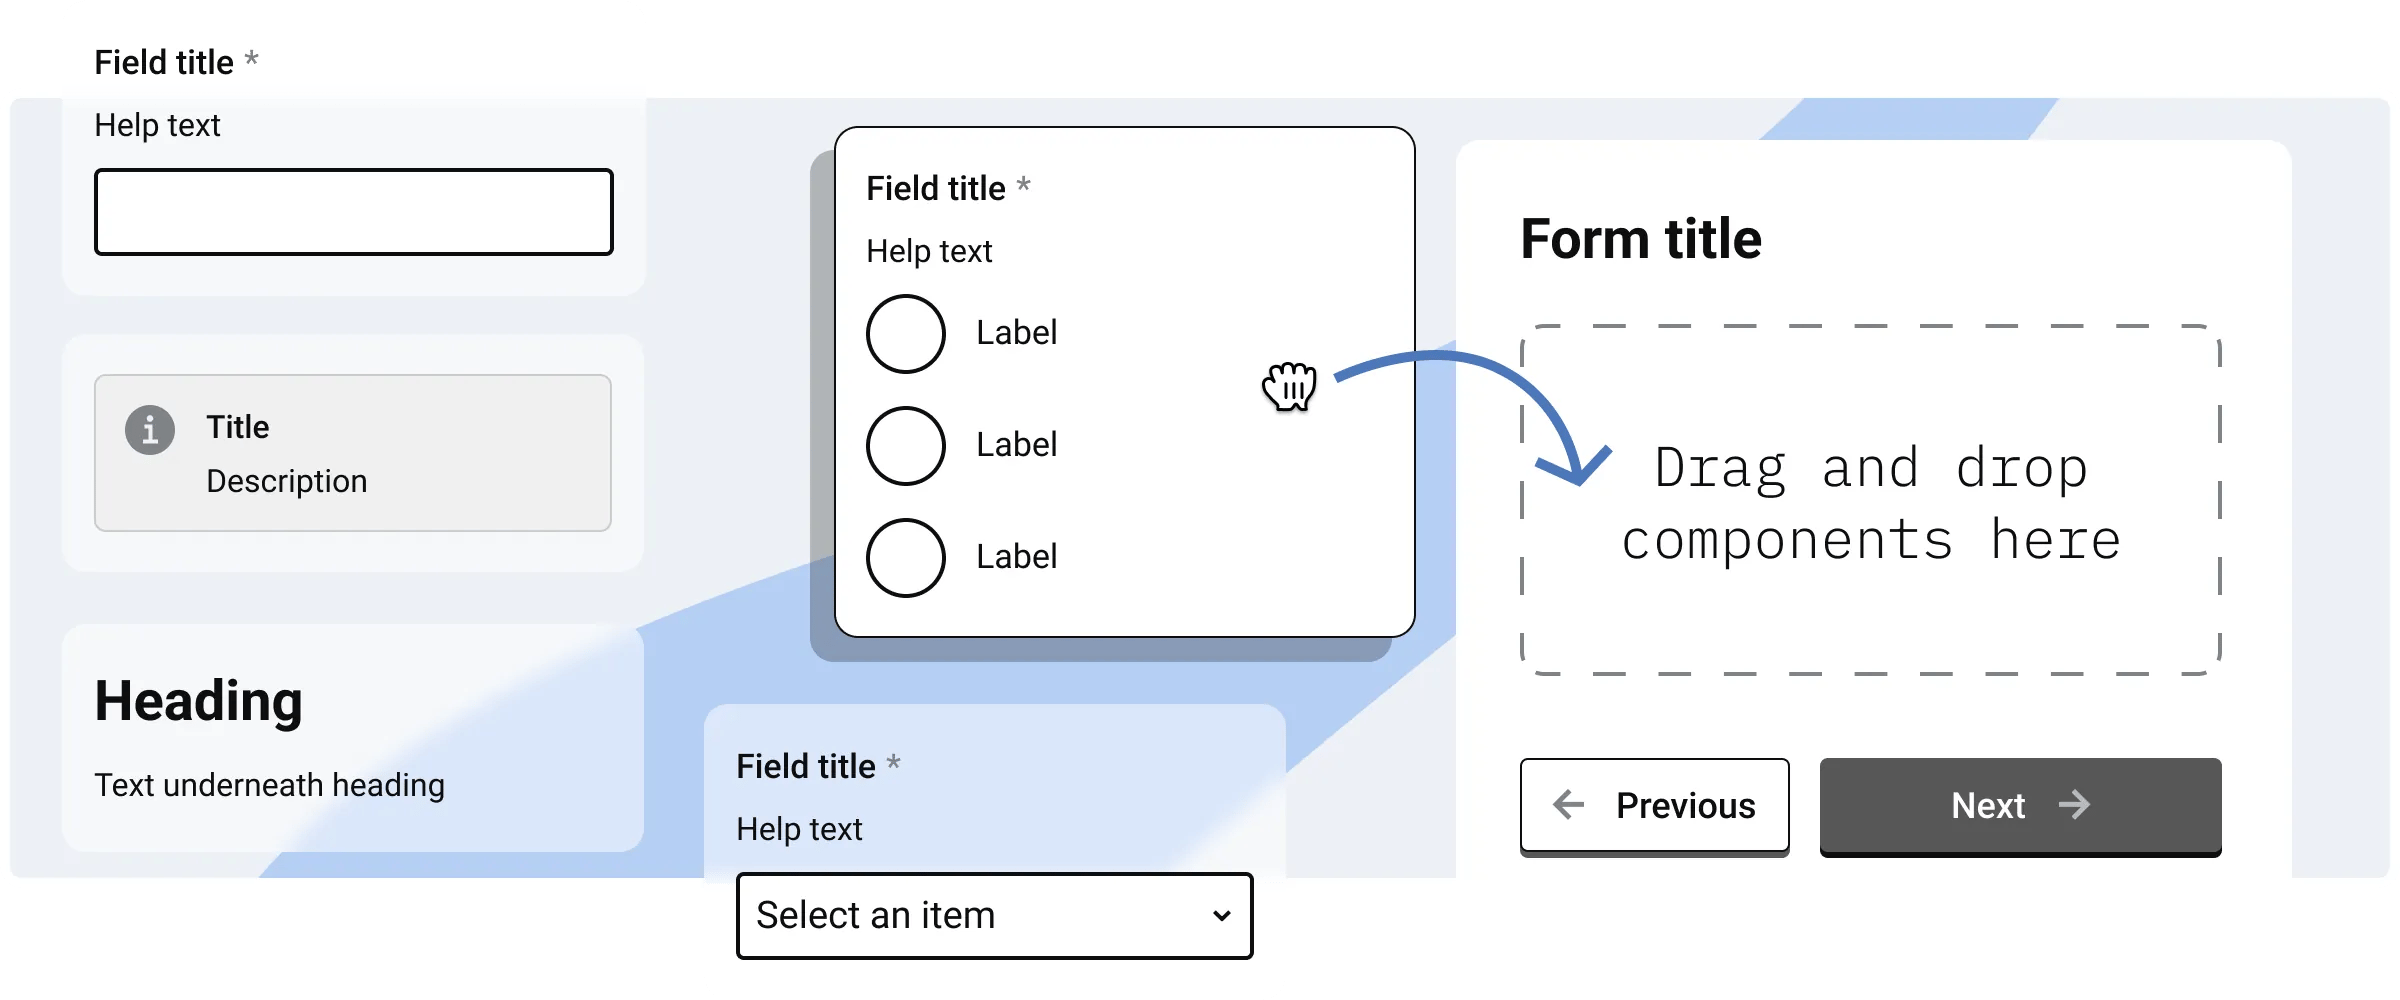 A graphic showing a user drag and drop a component into a form template